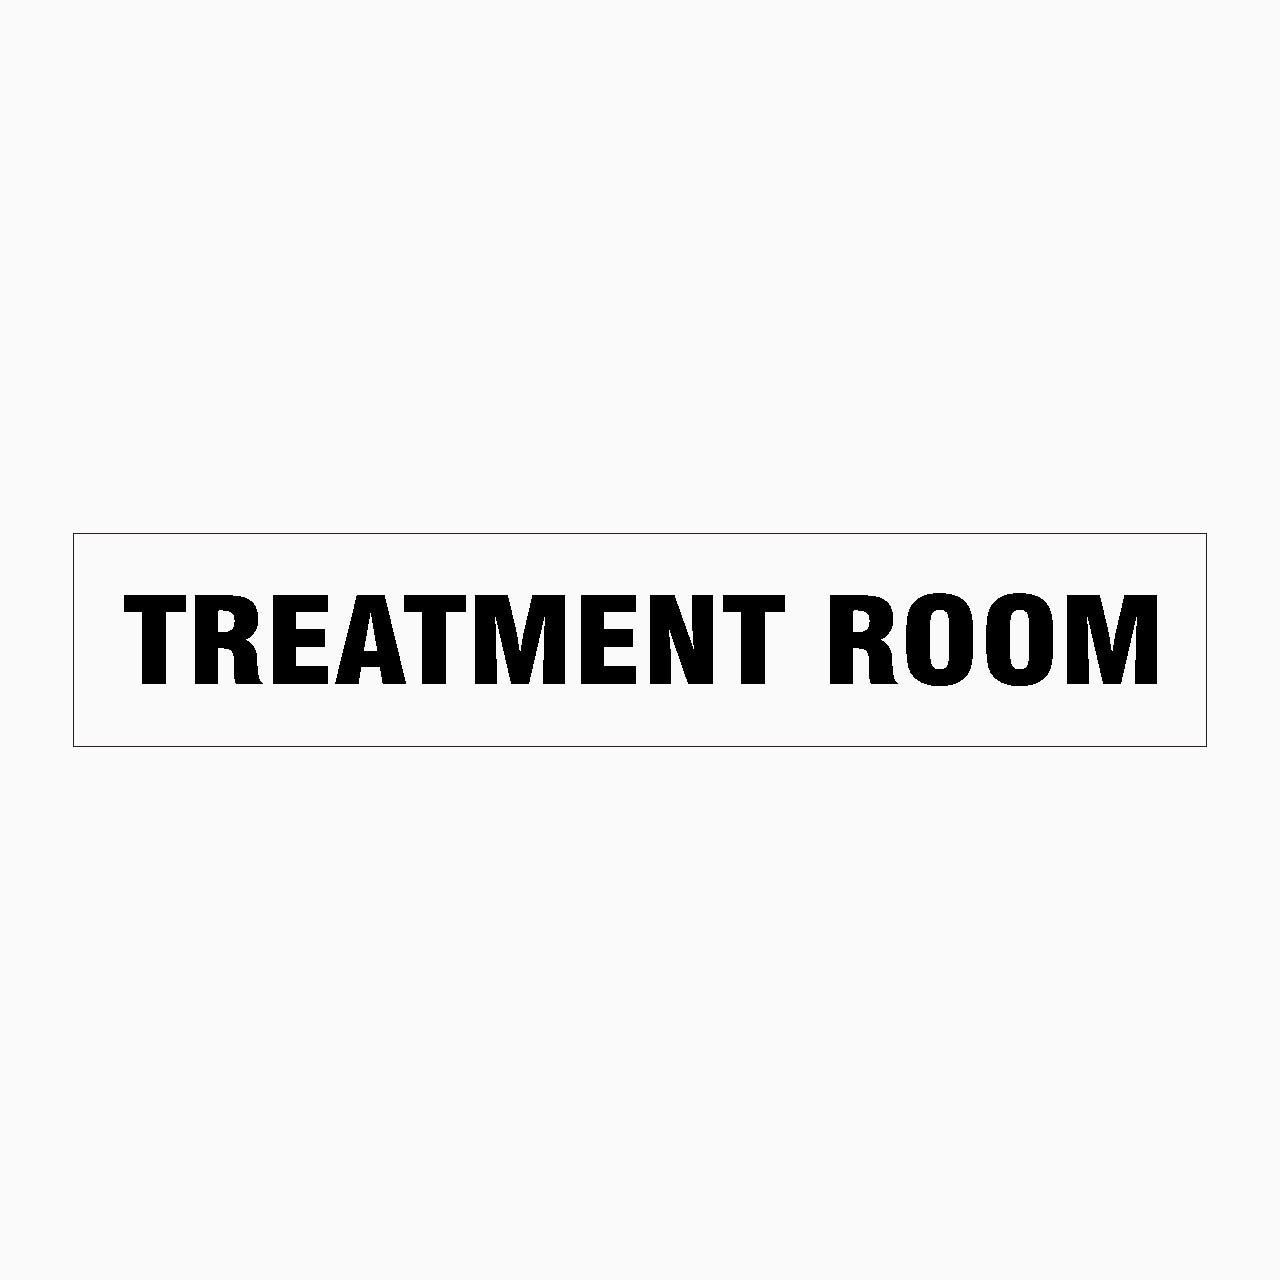 THERAPY ROOM SIGN